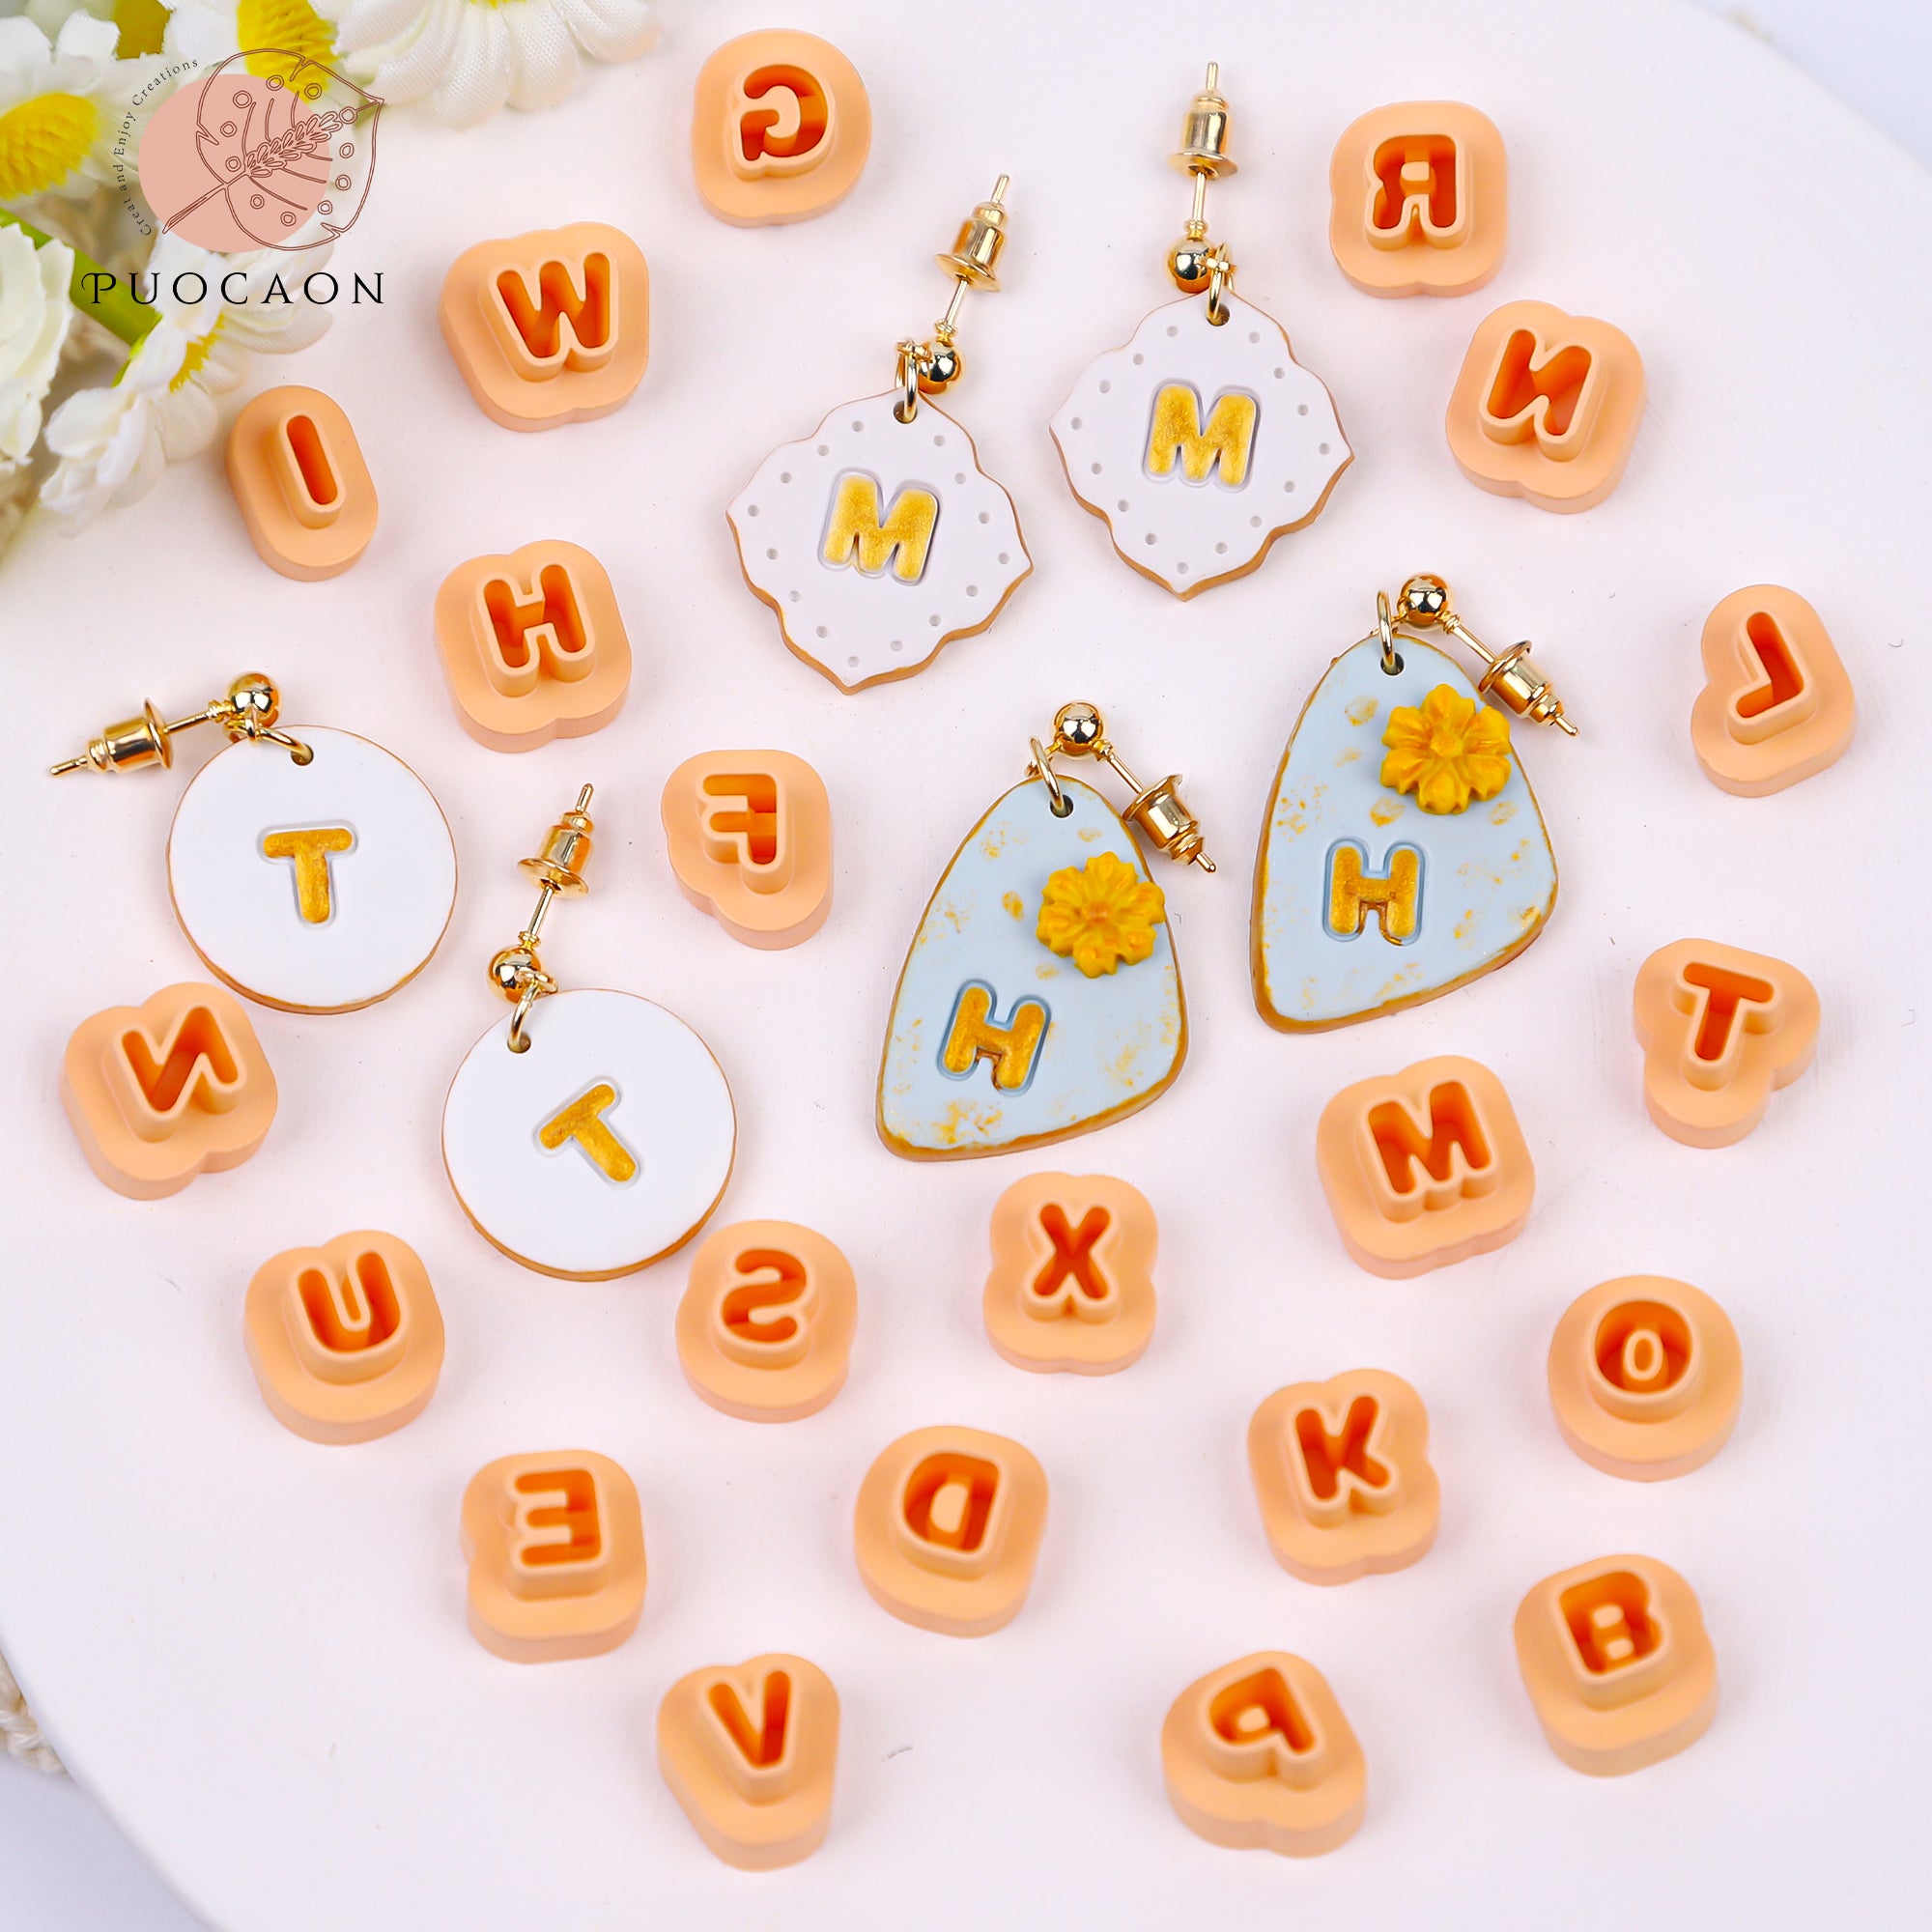 Puocaon Letters Polymer Clay Cutters 26 Pcs Uppercase Letters